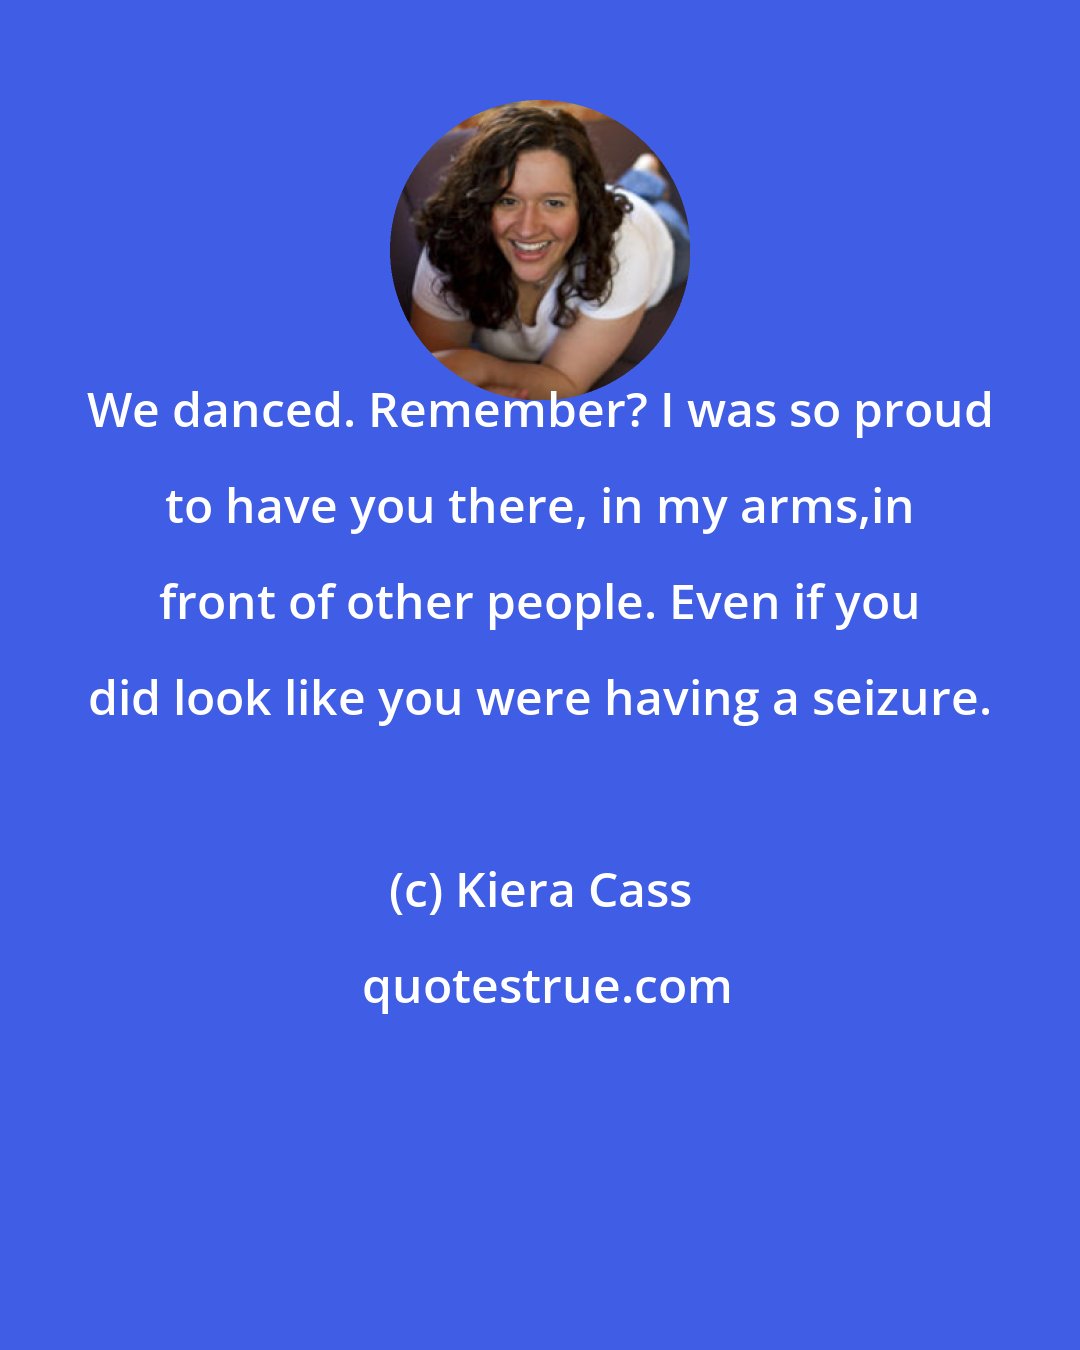 Kiera Cass: We danced. Remember? I was so proud to have you there, in my arms,in front of other people. Even if you did look like you were having a seizure.